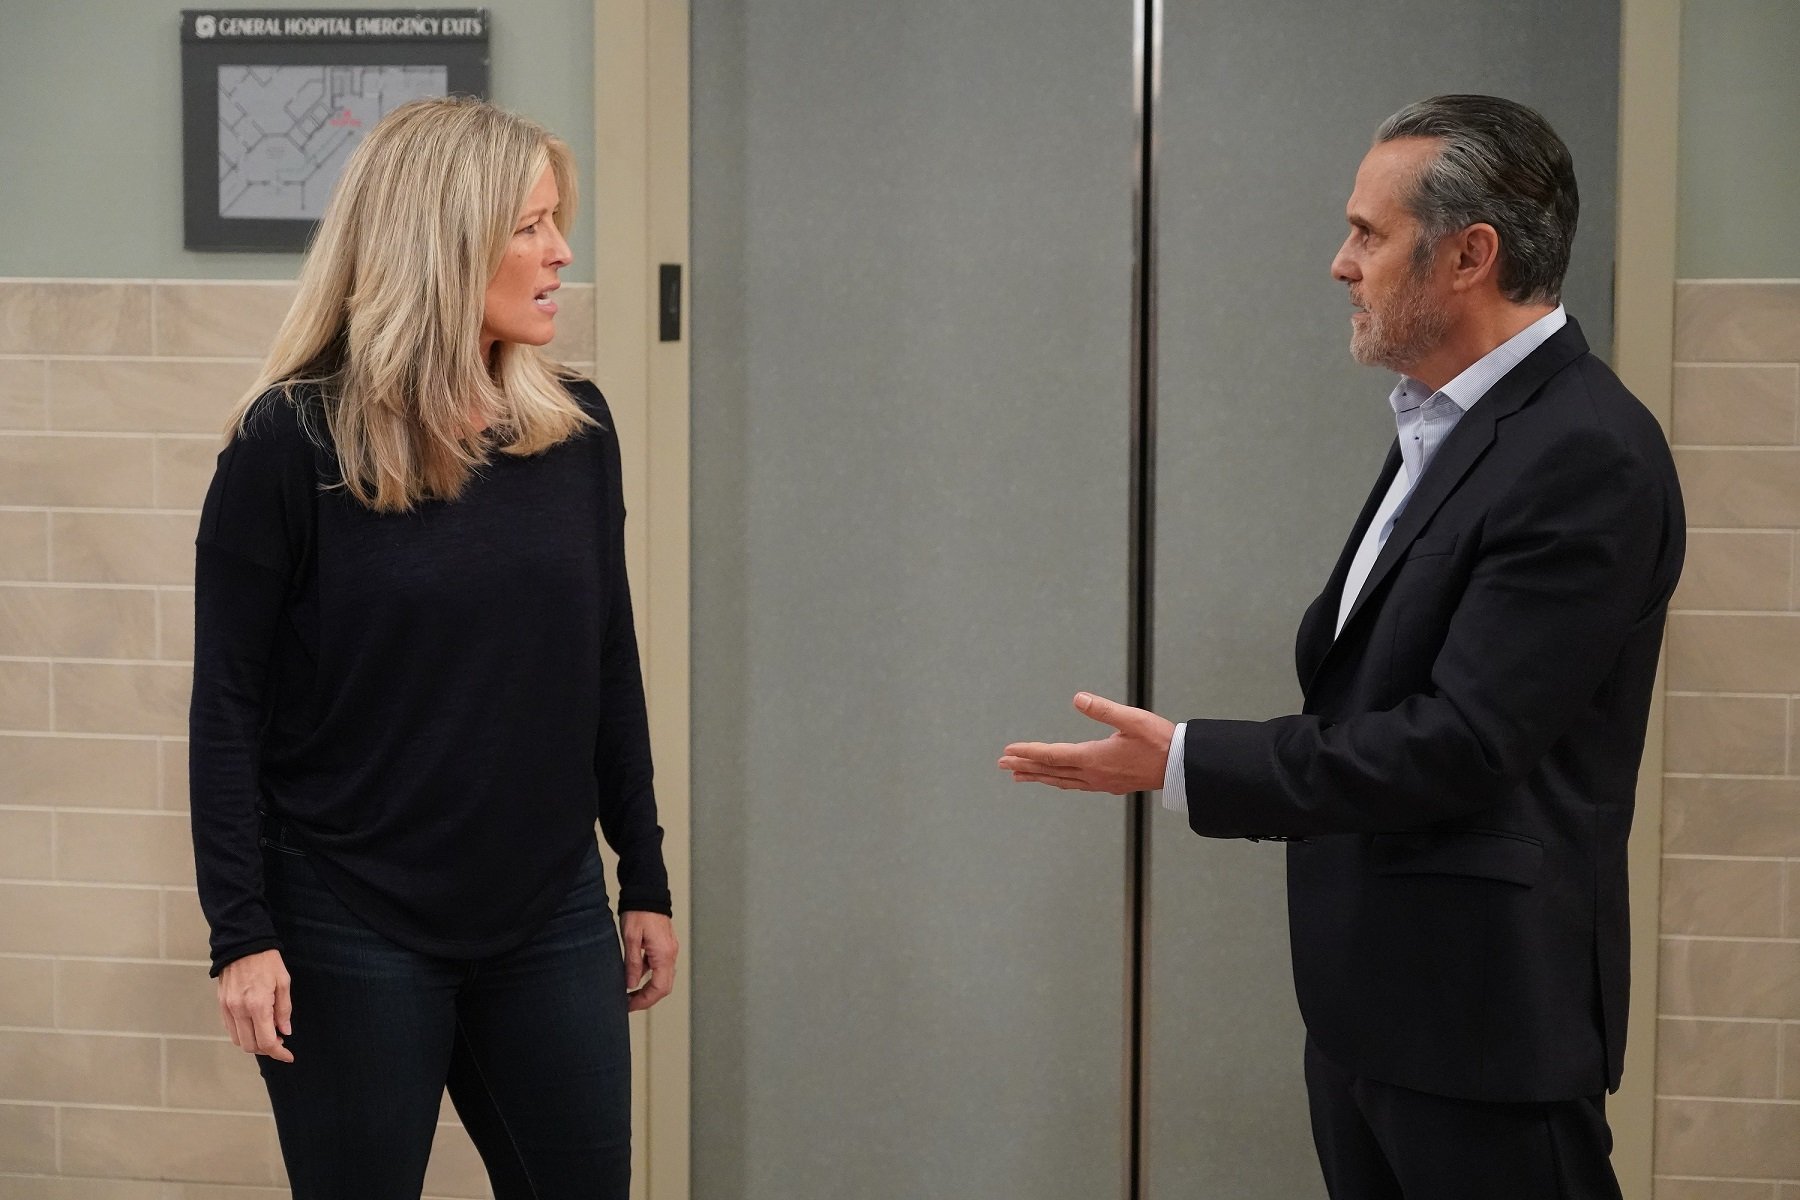 General Hospital weekly recap focuses on Sonny and Carly, both pictured here in all-black